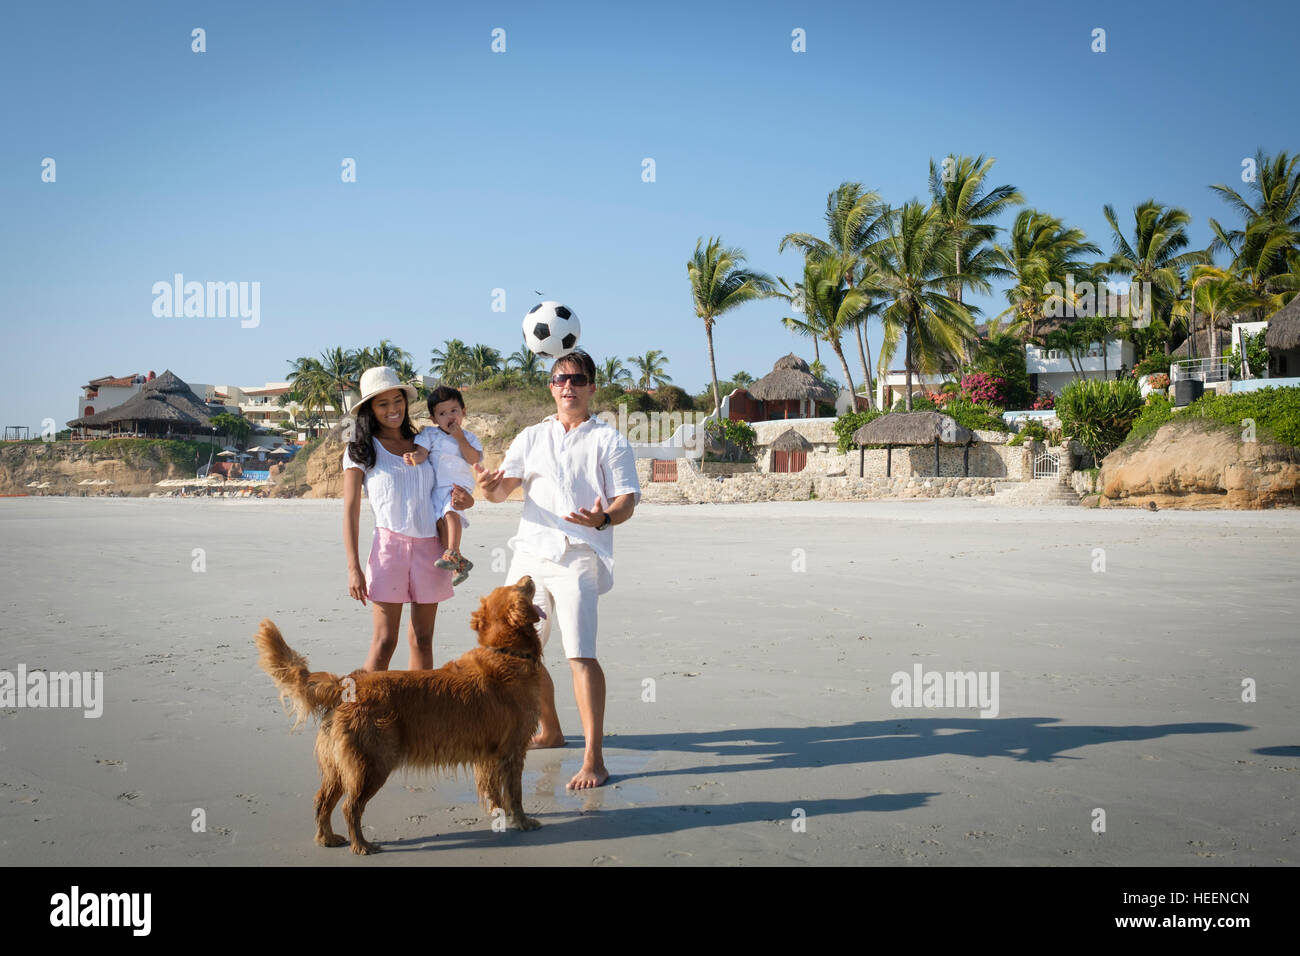 Family with toddler boy and Golden Retriever dog playing ball at the beach. Riviera Nayarit Mexico. Stock Photo